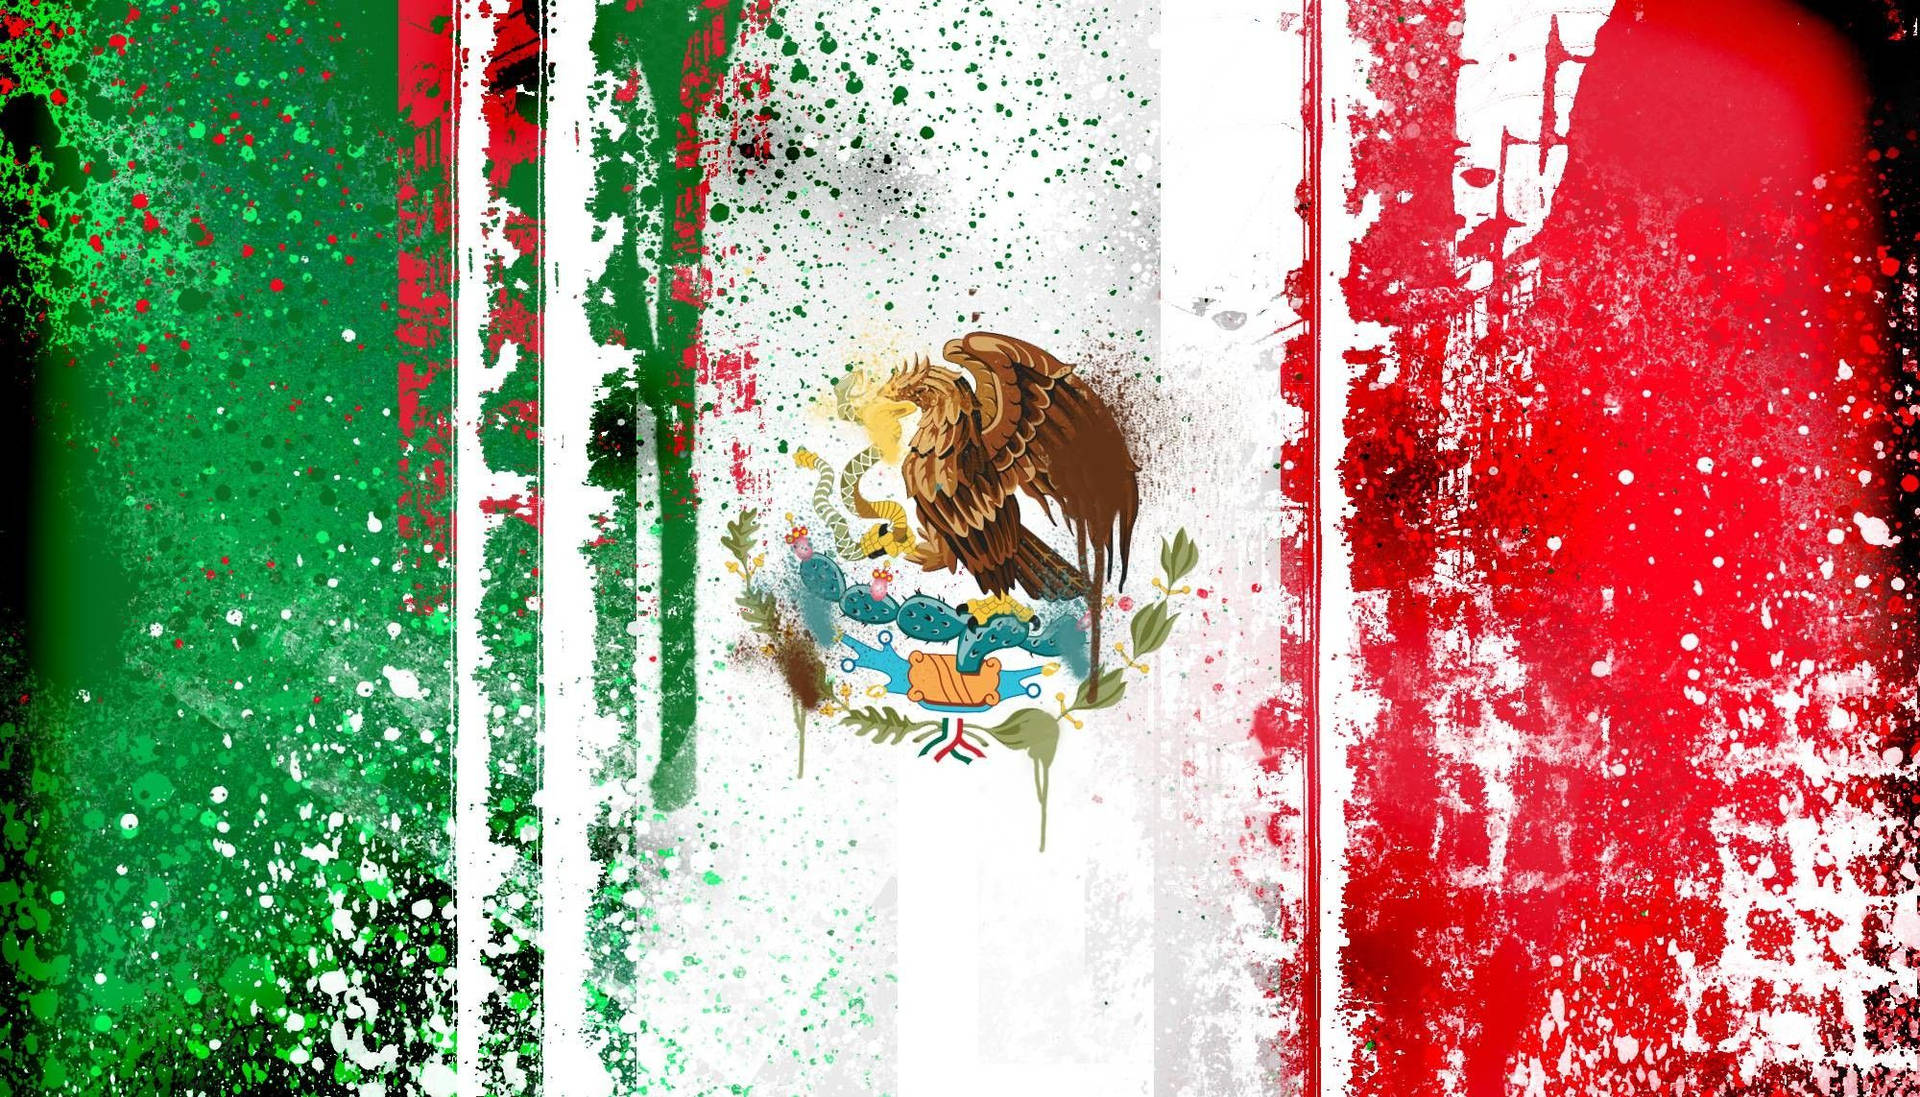 Mexican Worn-out Flag